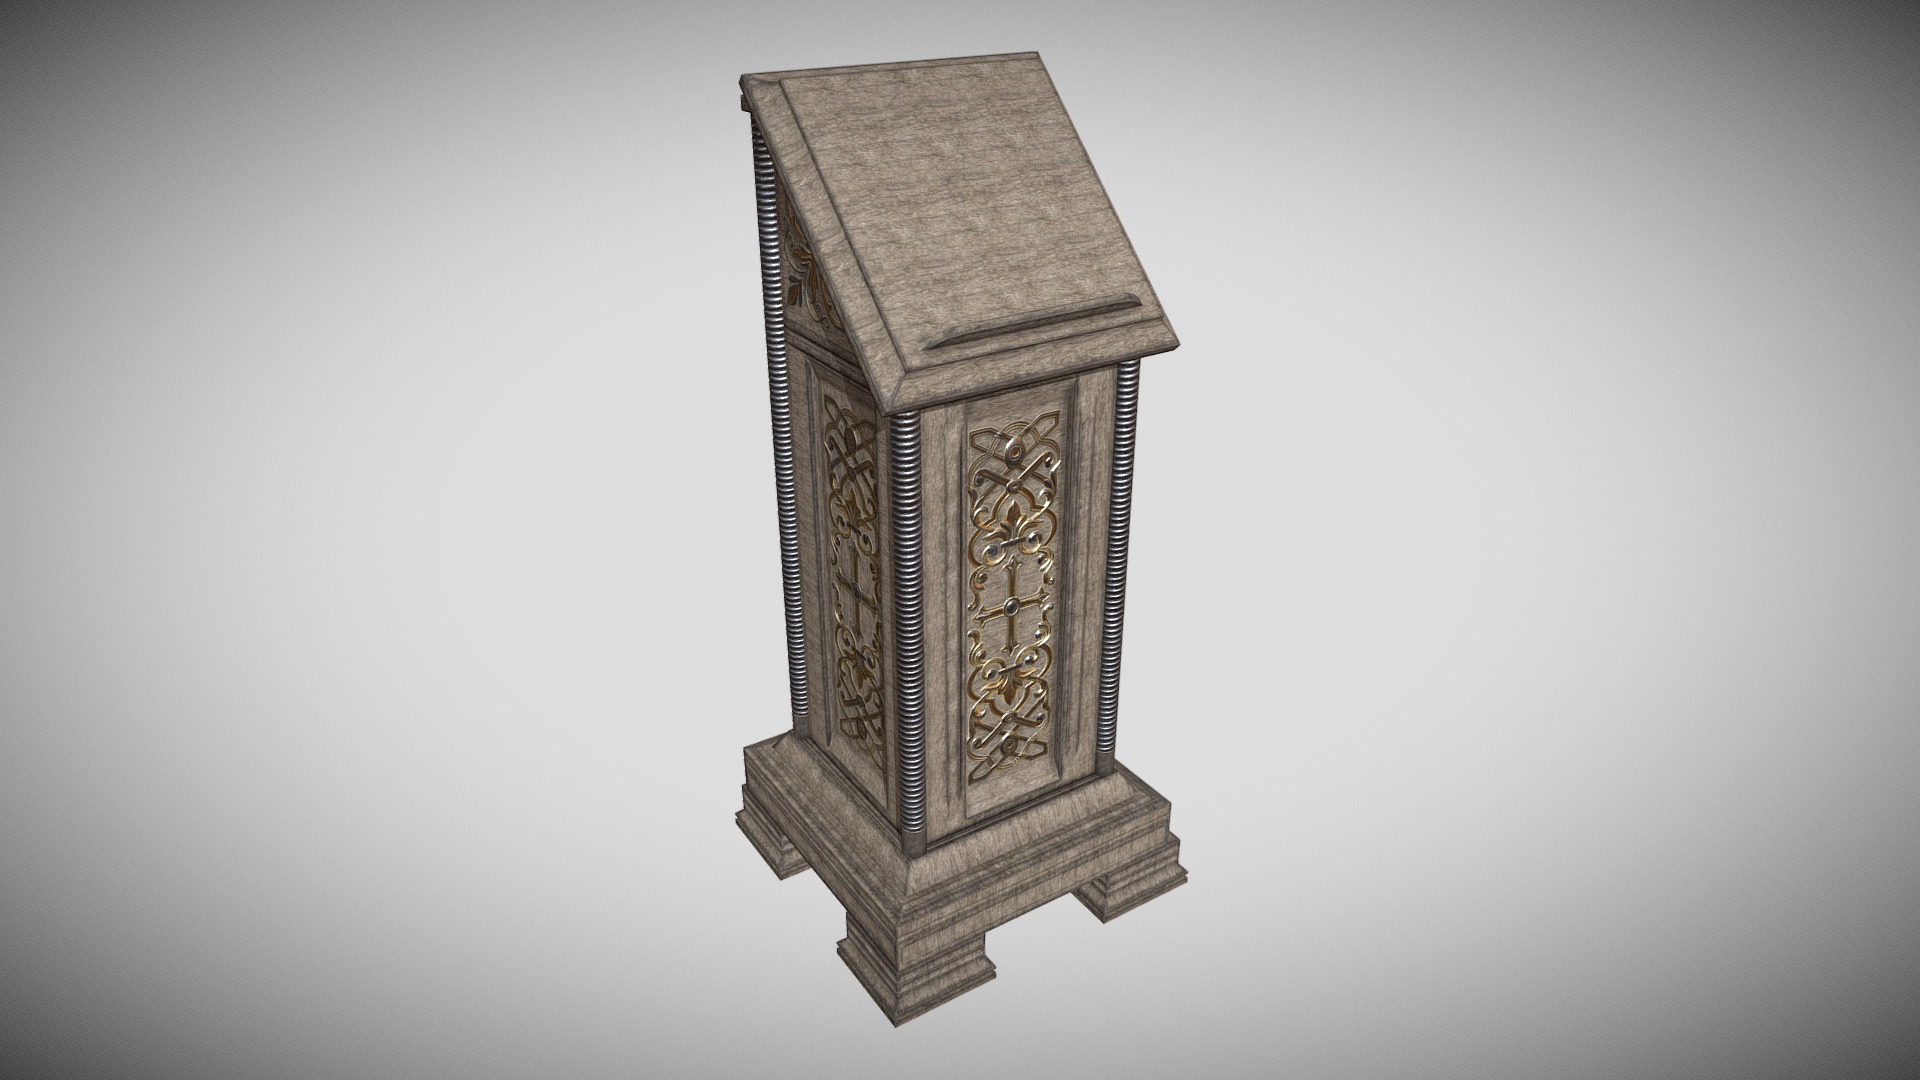 3D model Analogion (аналой) - This is a 3D model of the Analogion (аналой). The 3D model is about a small wooden box.